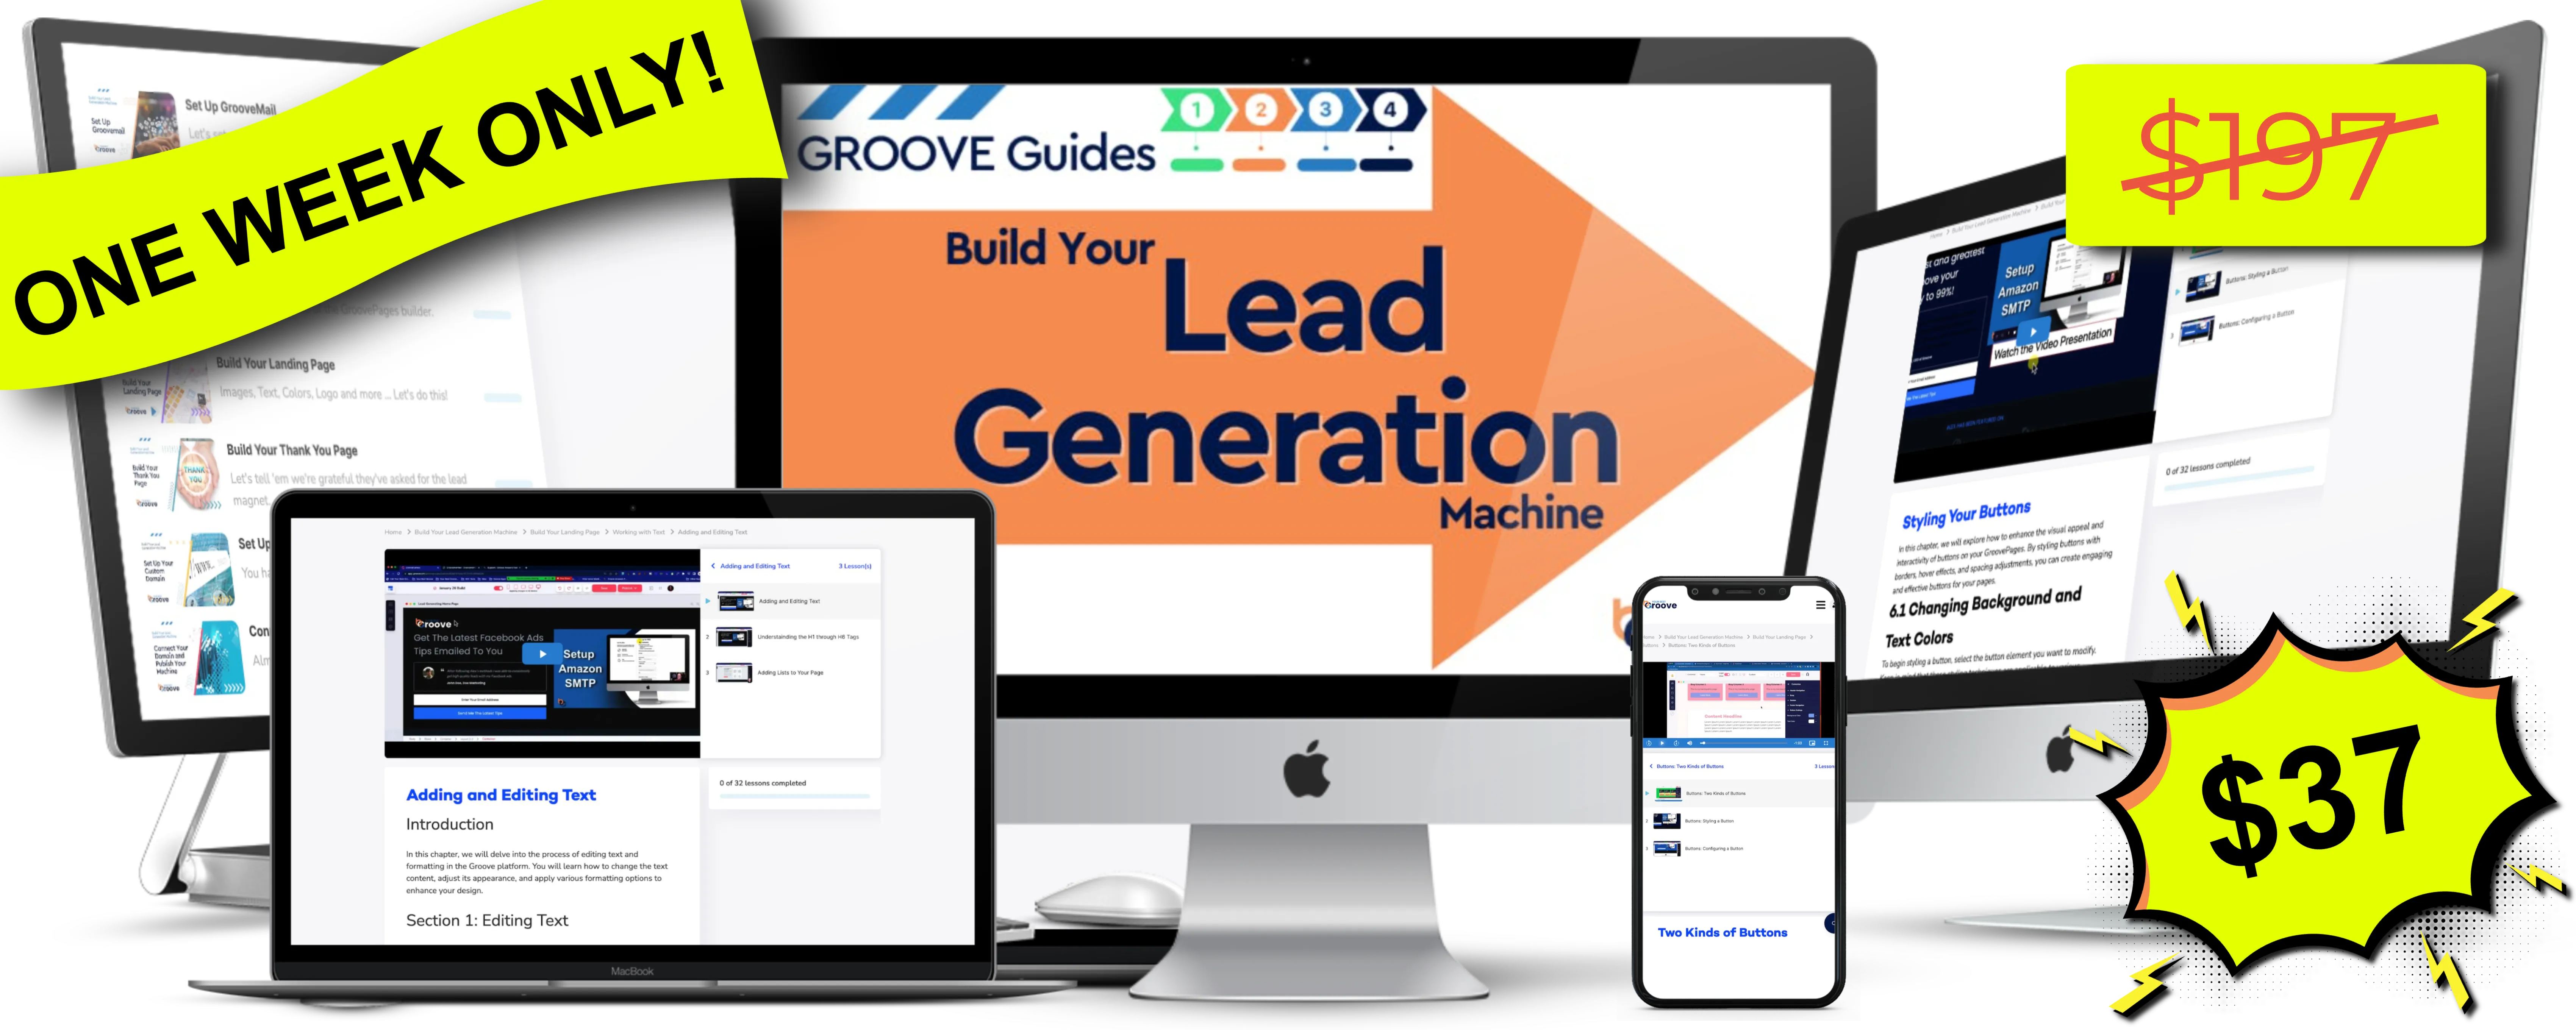 Groove Guides dsplays for Build Your Lead Generation Machine 